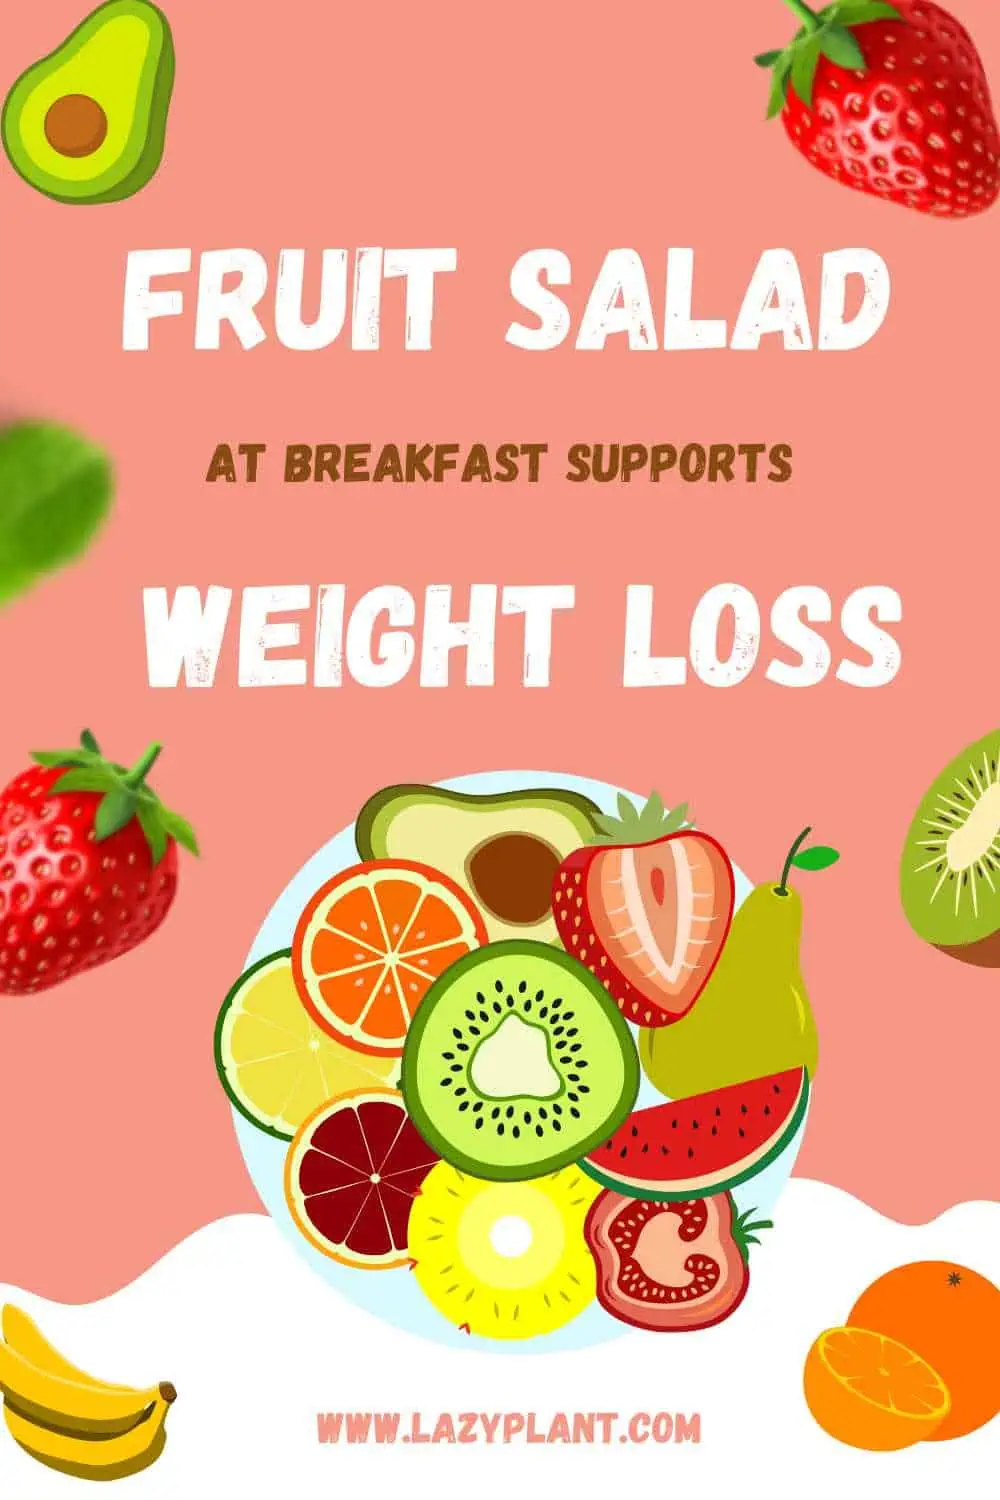 A cup of fruit salad at breakfast supports weight loss!